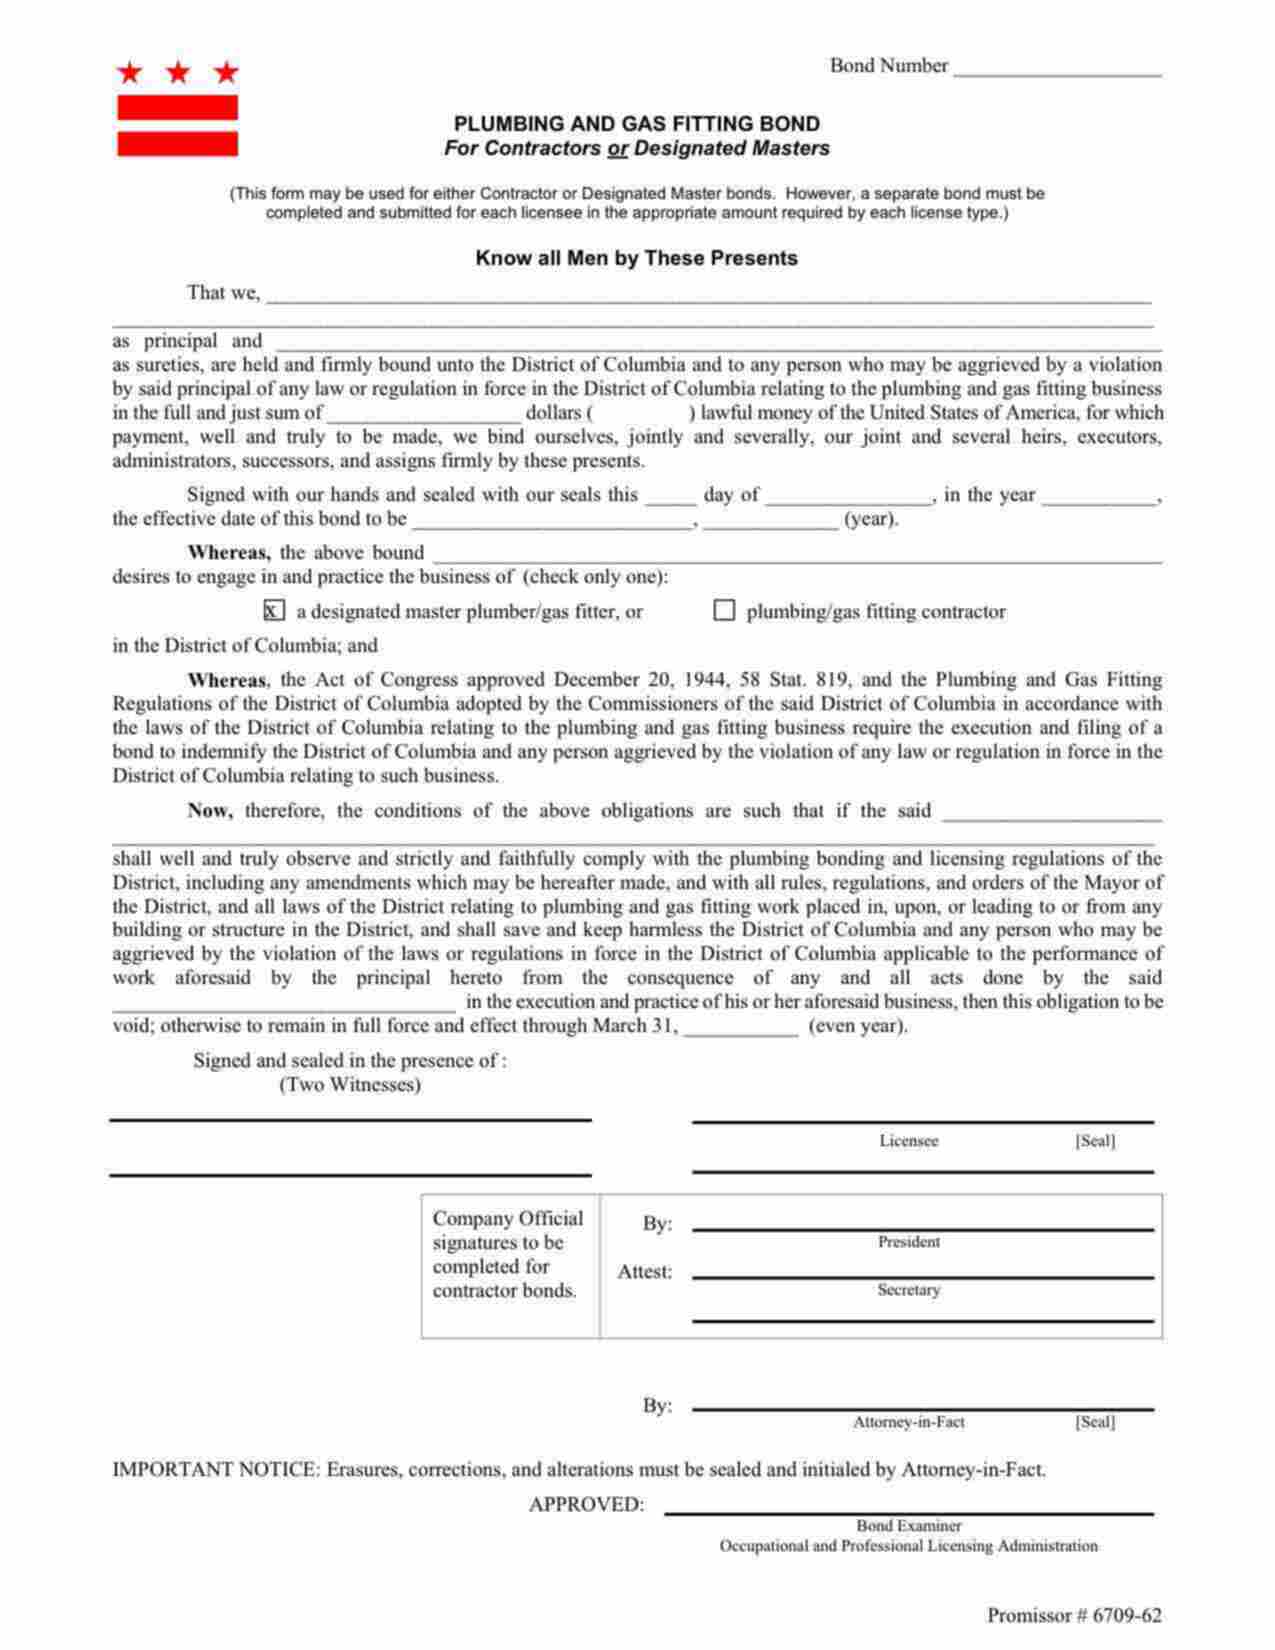 District of Columbia Designated Master Plumber/Gas Fitter Bond Form